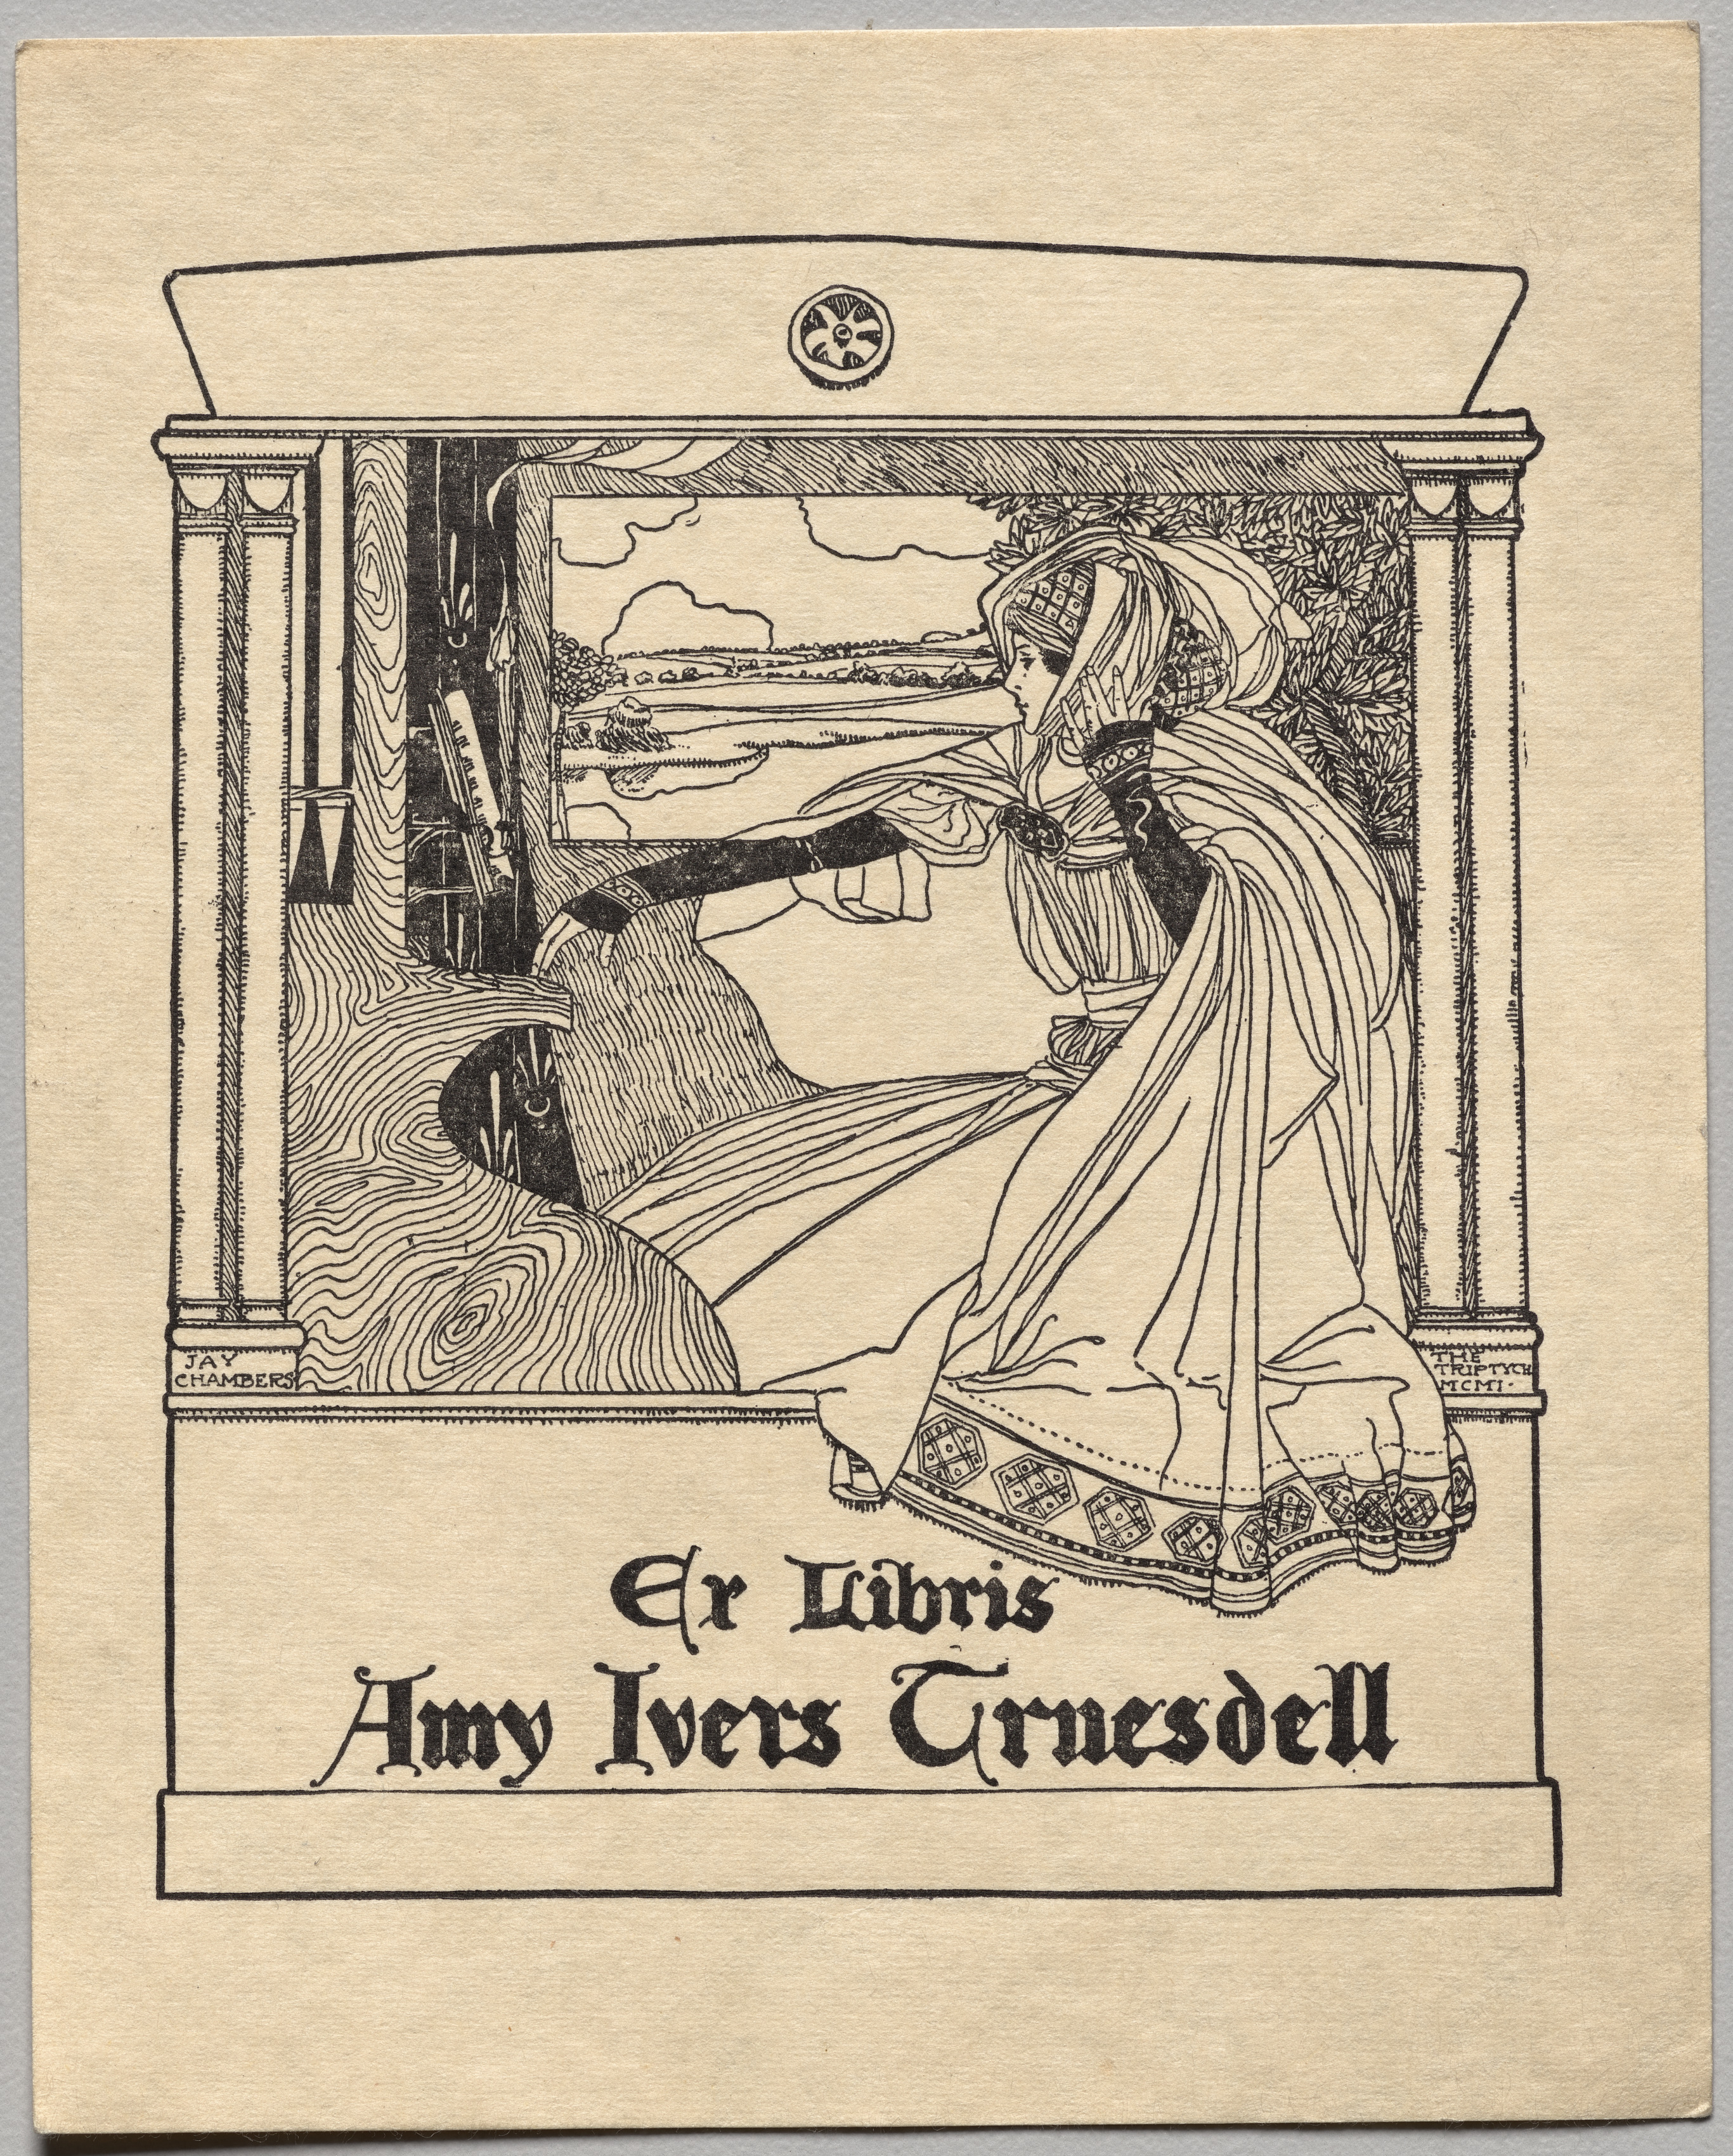 Bookplate: Amy Ivers Truesdell